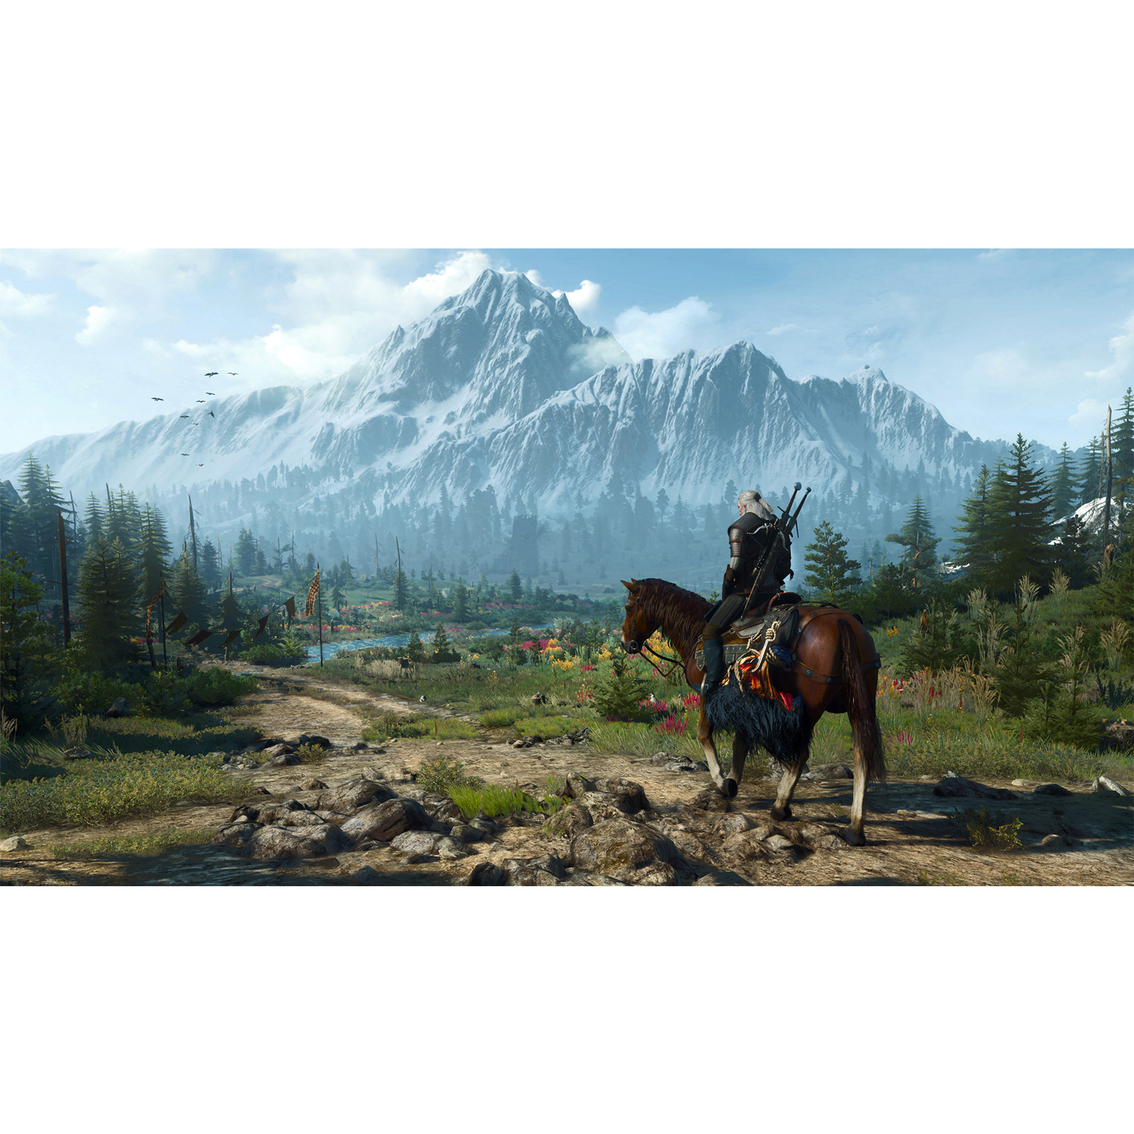 The Witcher 3: Wild Hunt to Secure PS4 HDR Support Soon